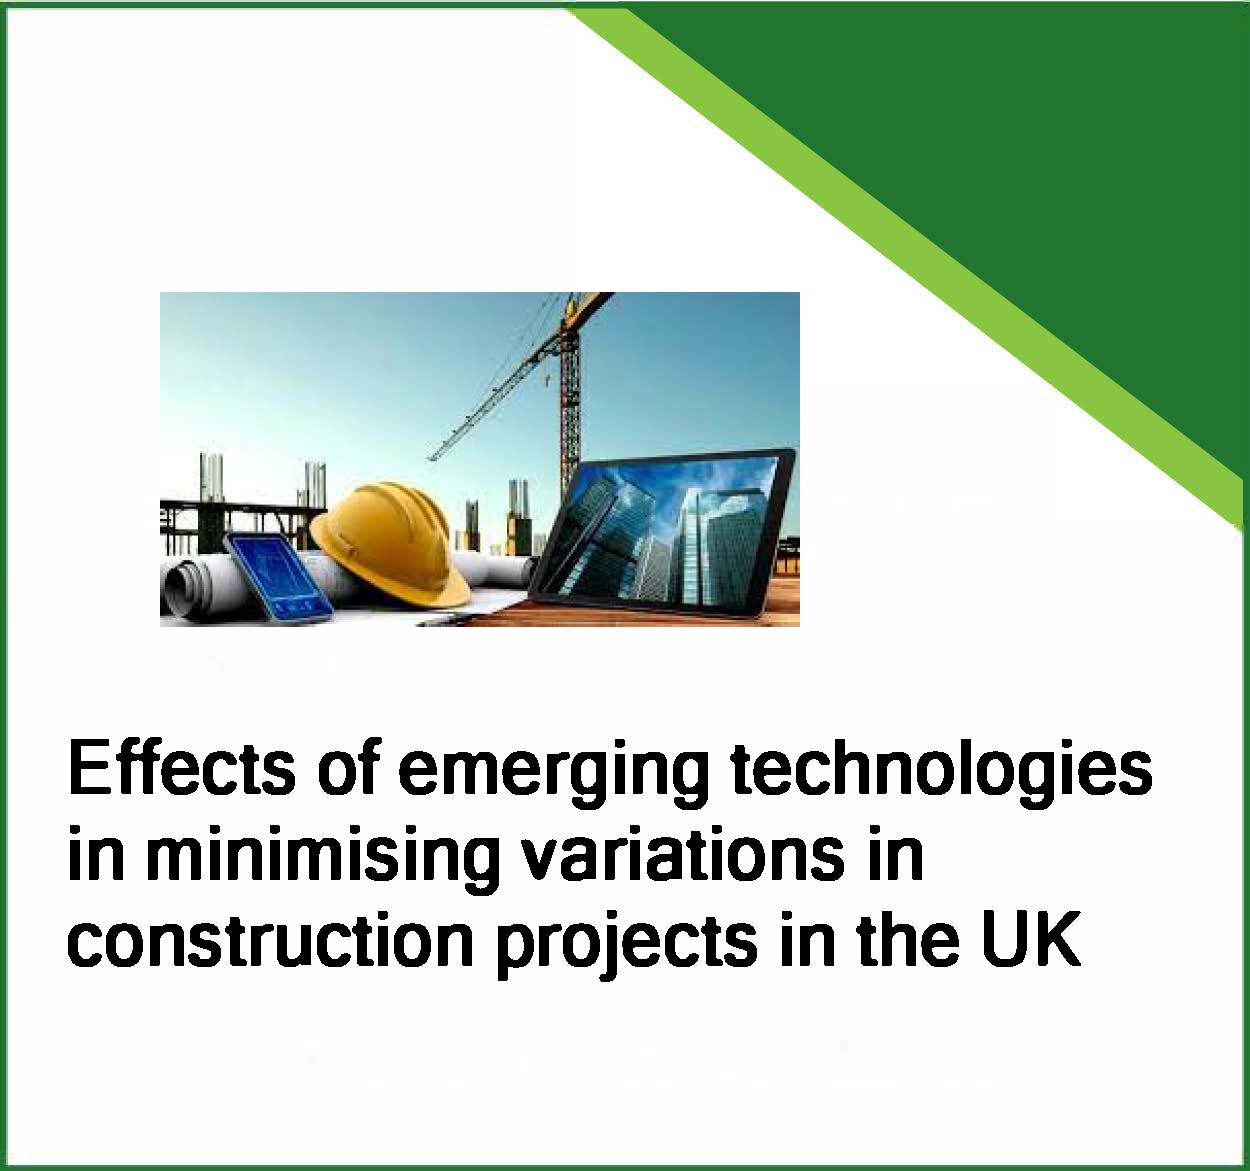 Effects of emerging technologies in minimising variations in construction projects in the UK